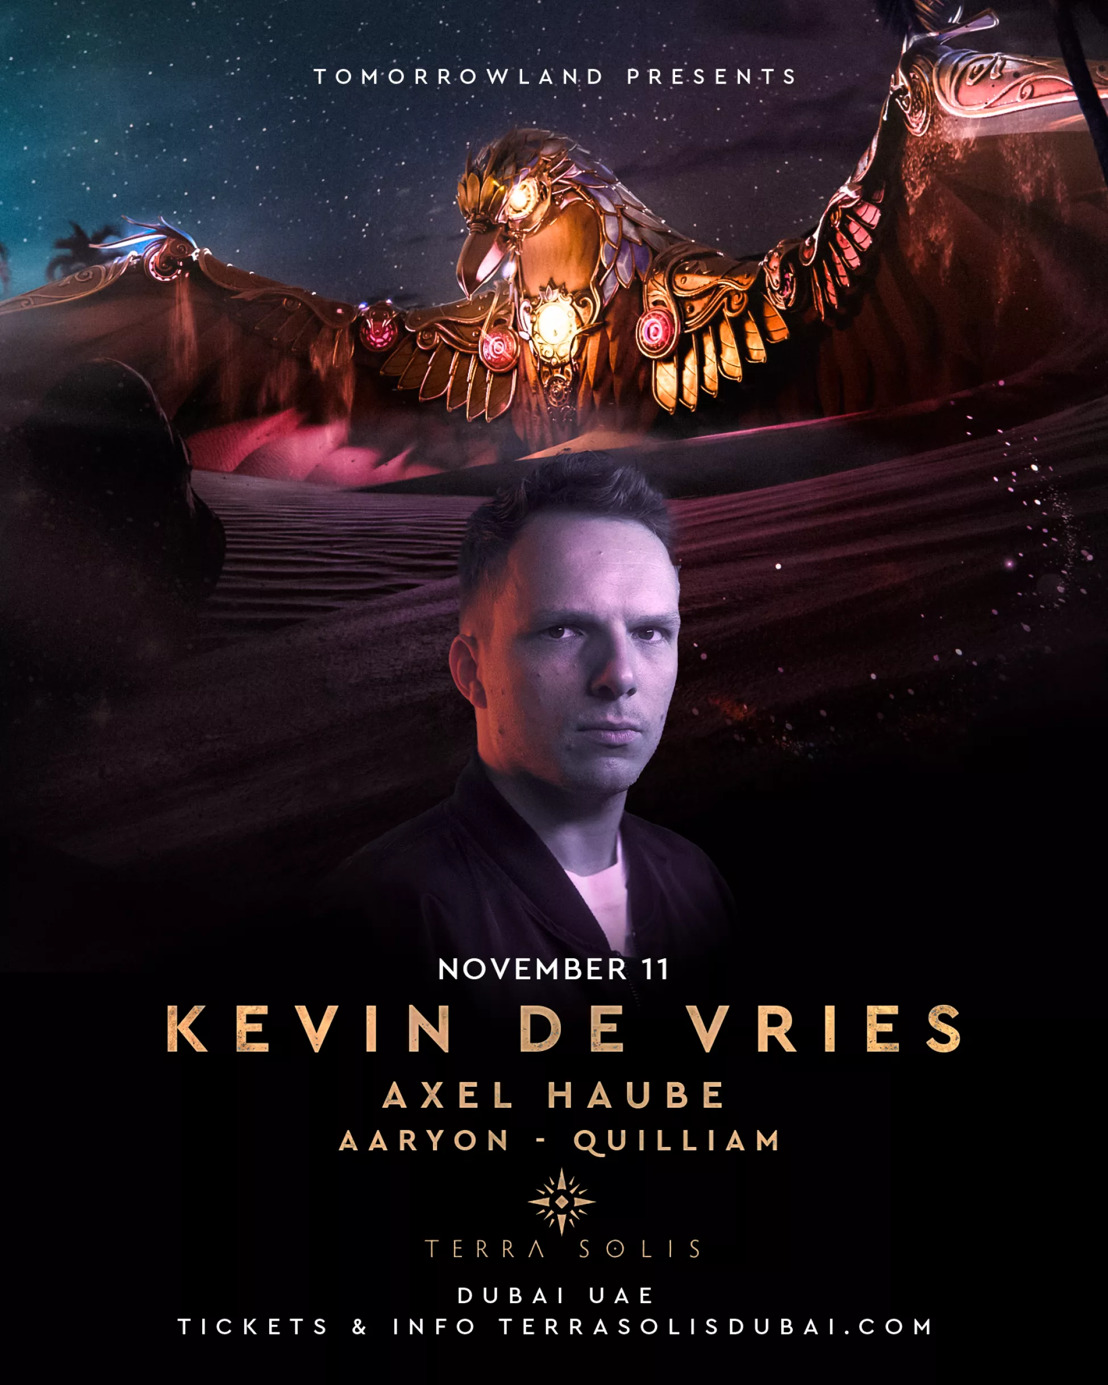 Kevin de Vries to light up Terra Solis by Tomorrowland 